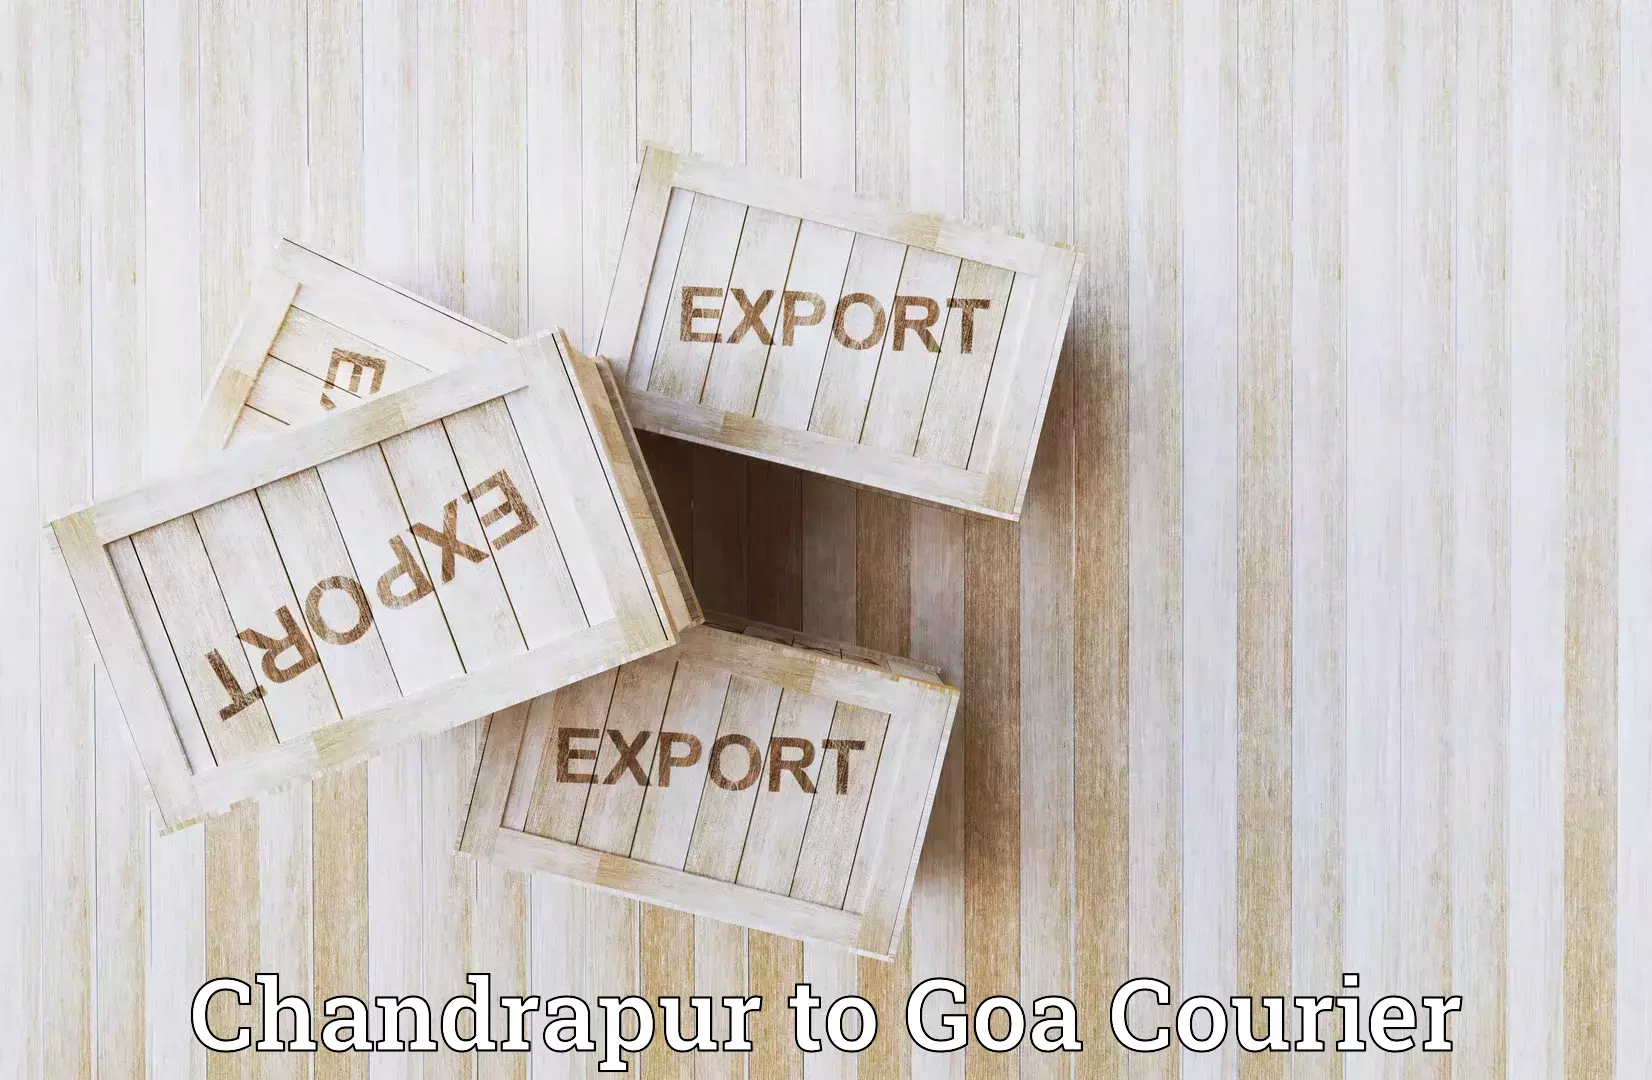 Sustainable shipping practices Chandrapur to Goa